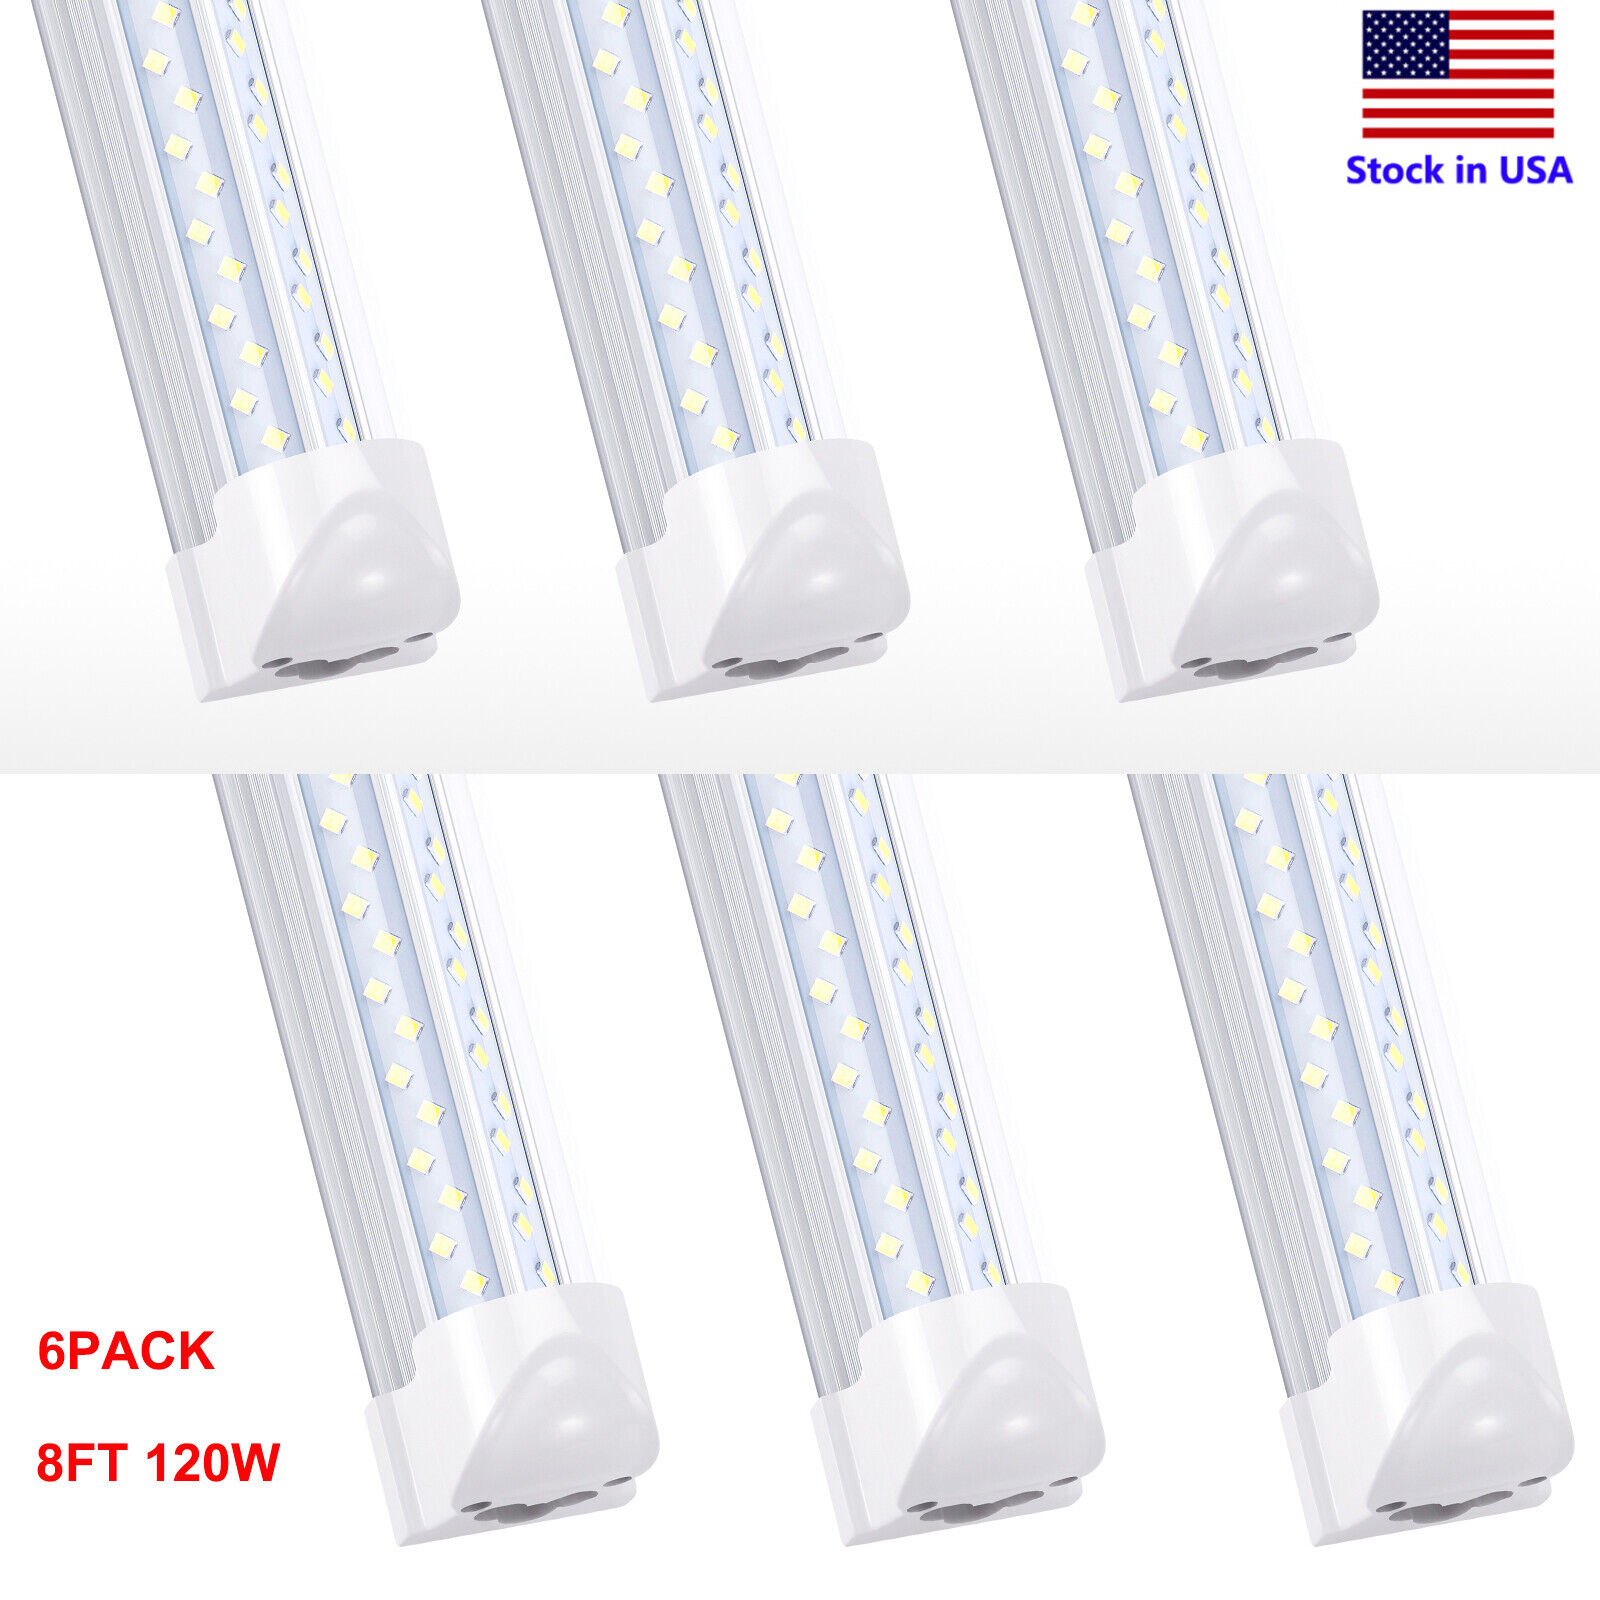 6PACK 8FT LED Shop Light 120W T8 Linkable LED Light Fixture For Garage Warehouse Jomitop Does Not Apply